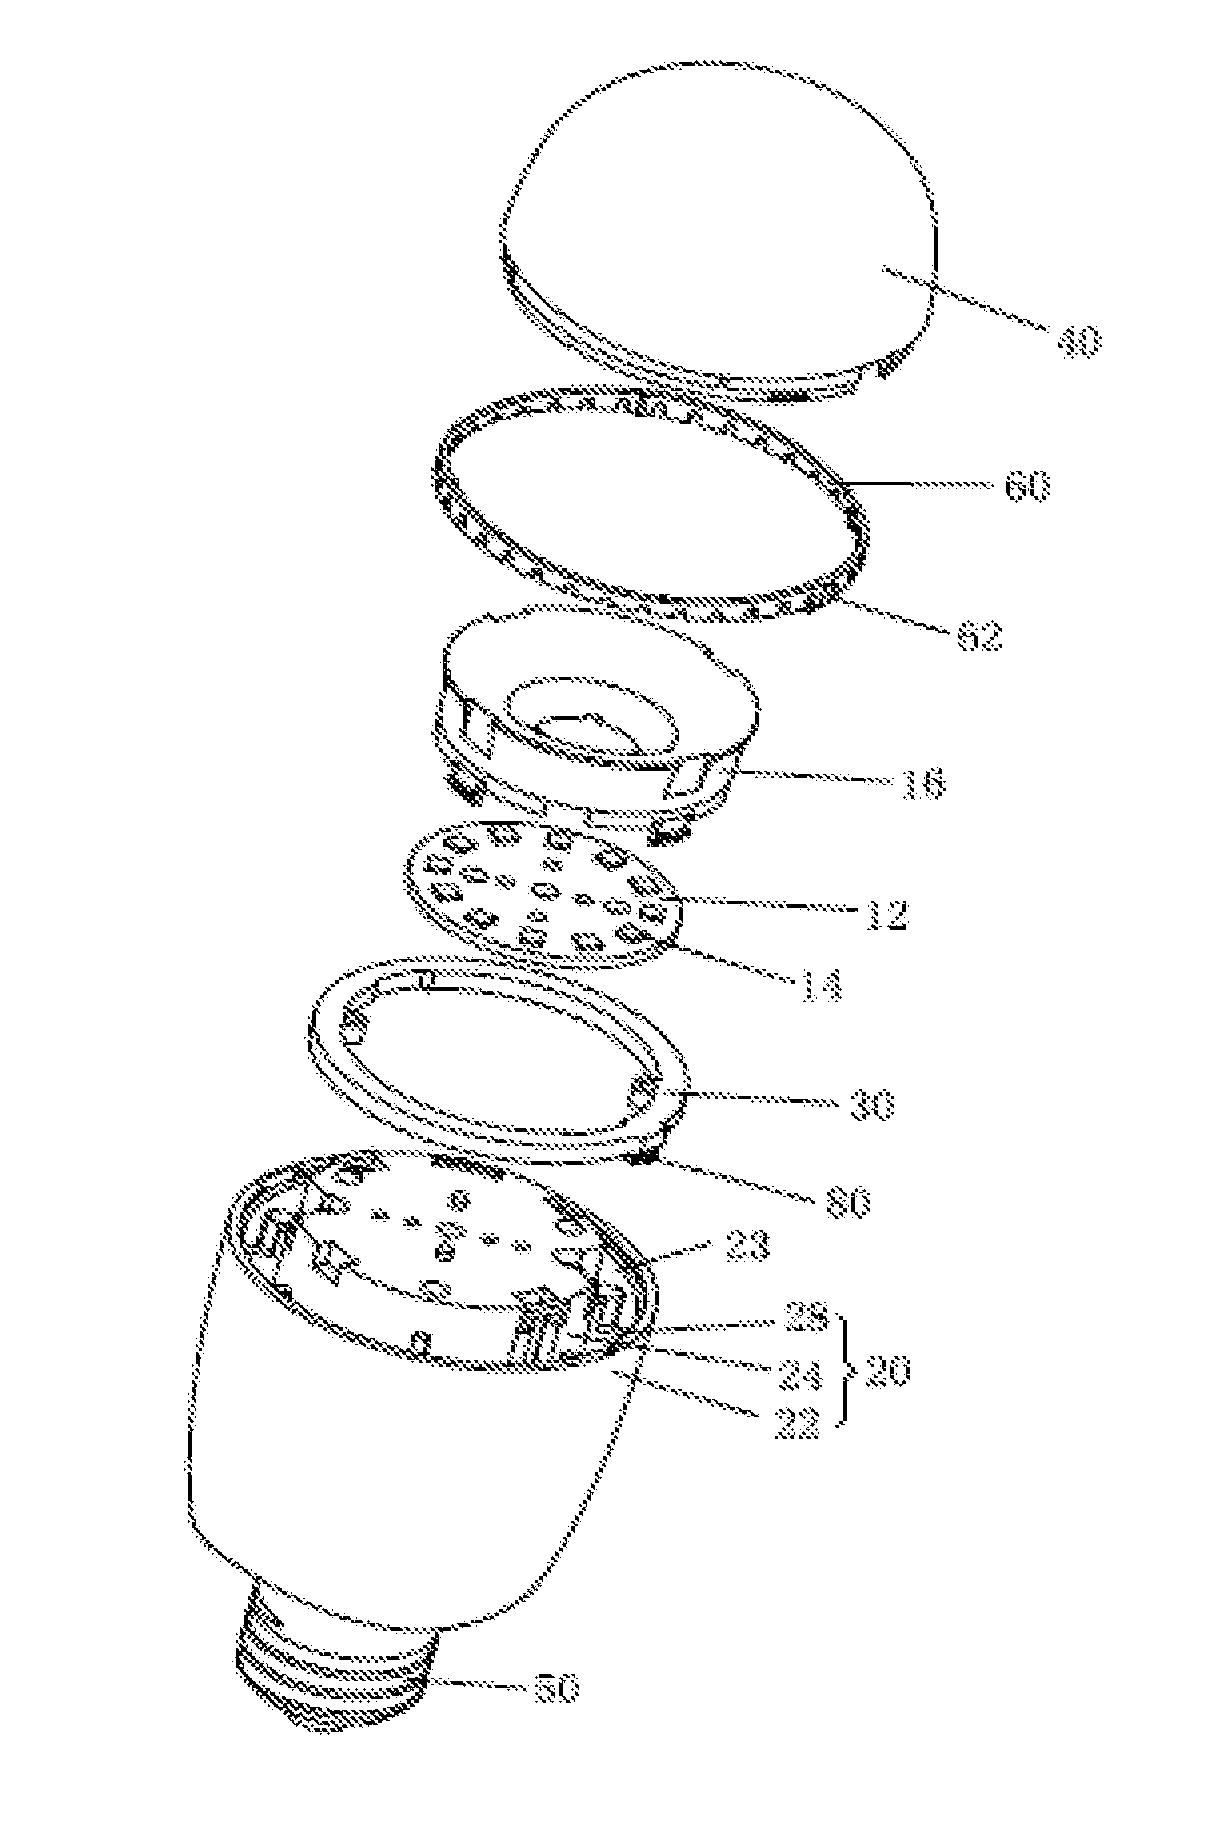 LED lighting device and system, and reset button arrangement method